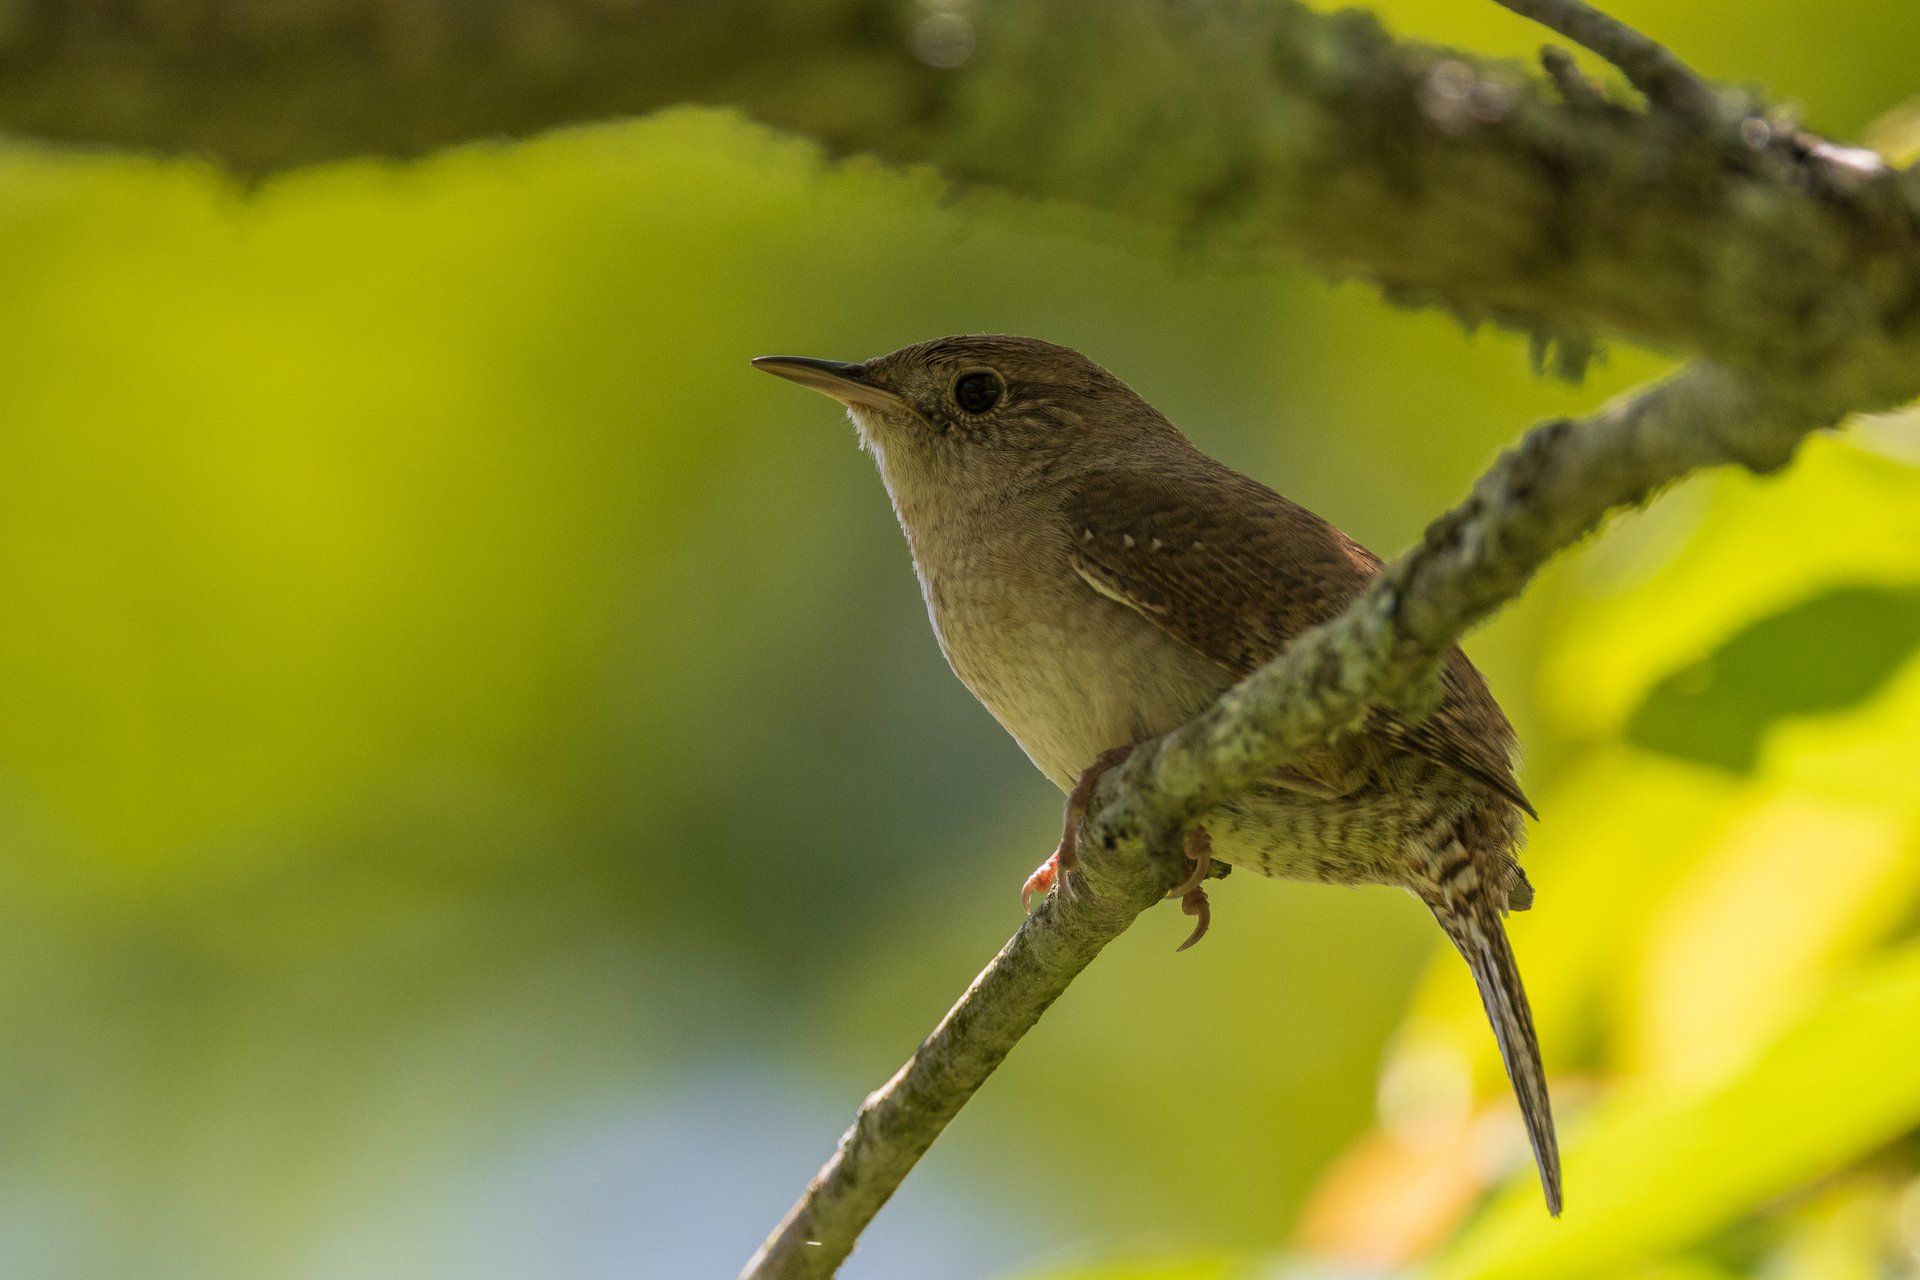 House Wren on branch with greenery background